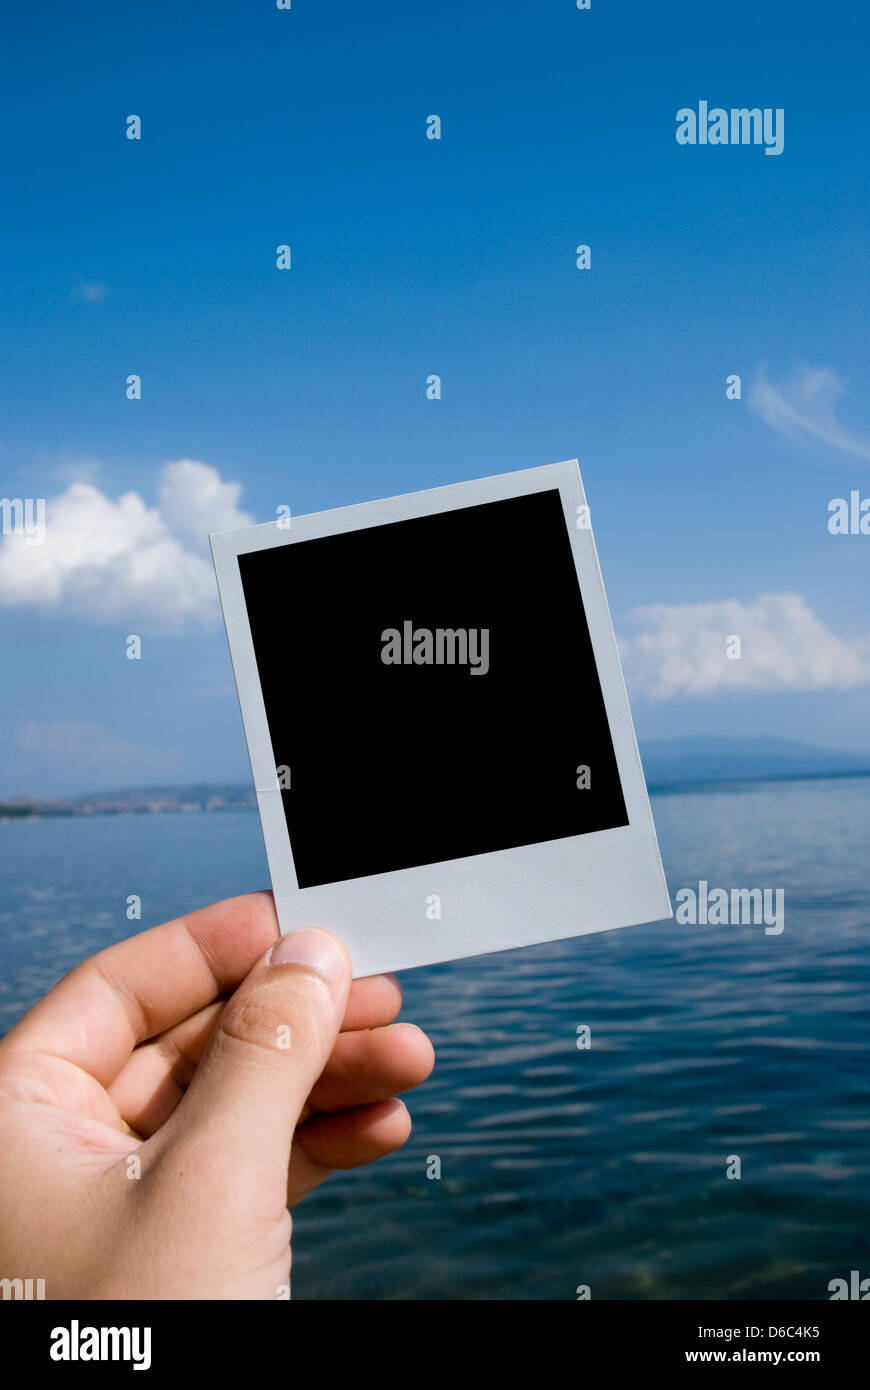 Photo in a hand on nature sea background Stock Photo